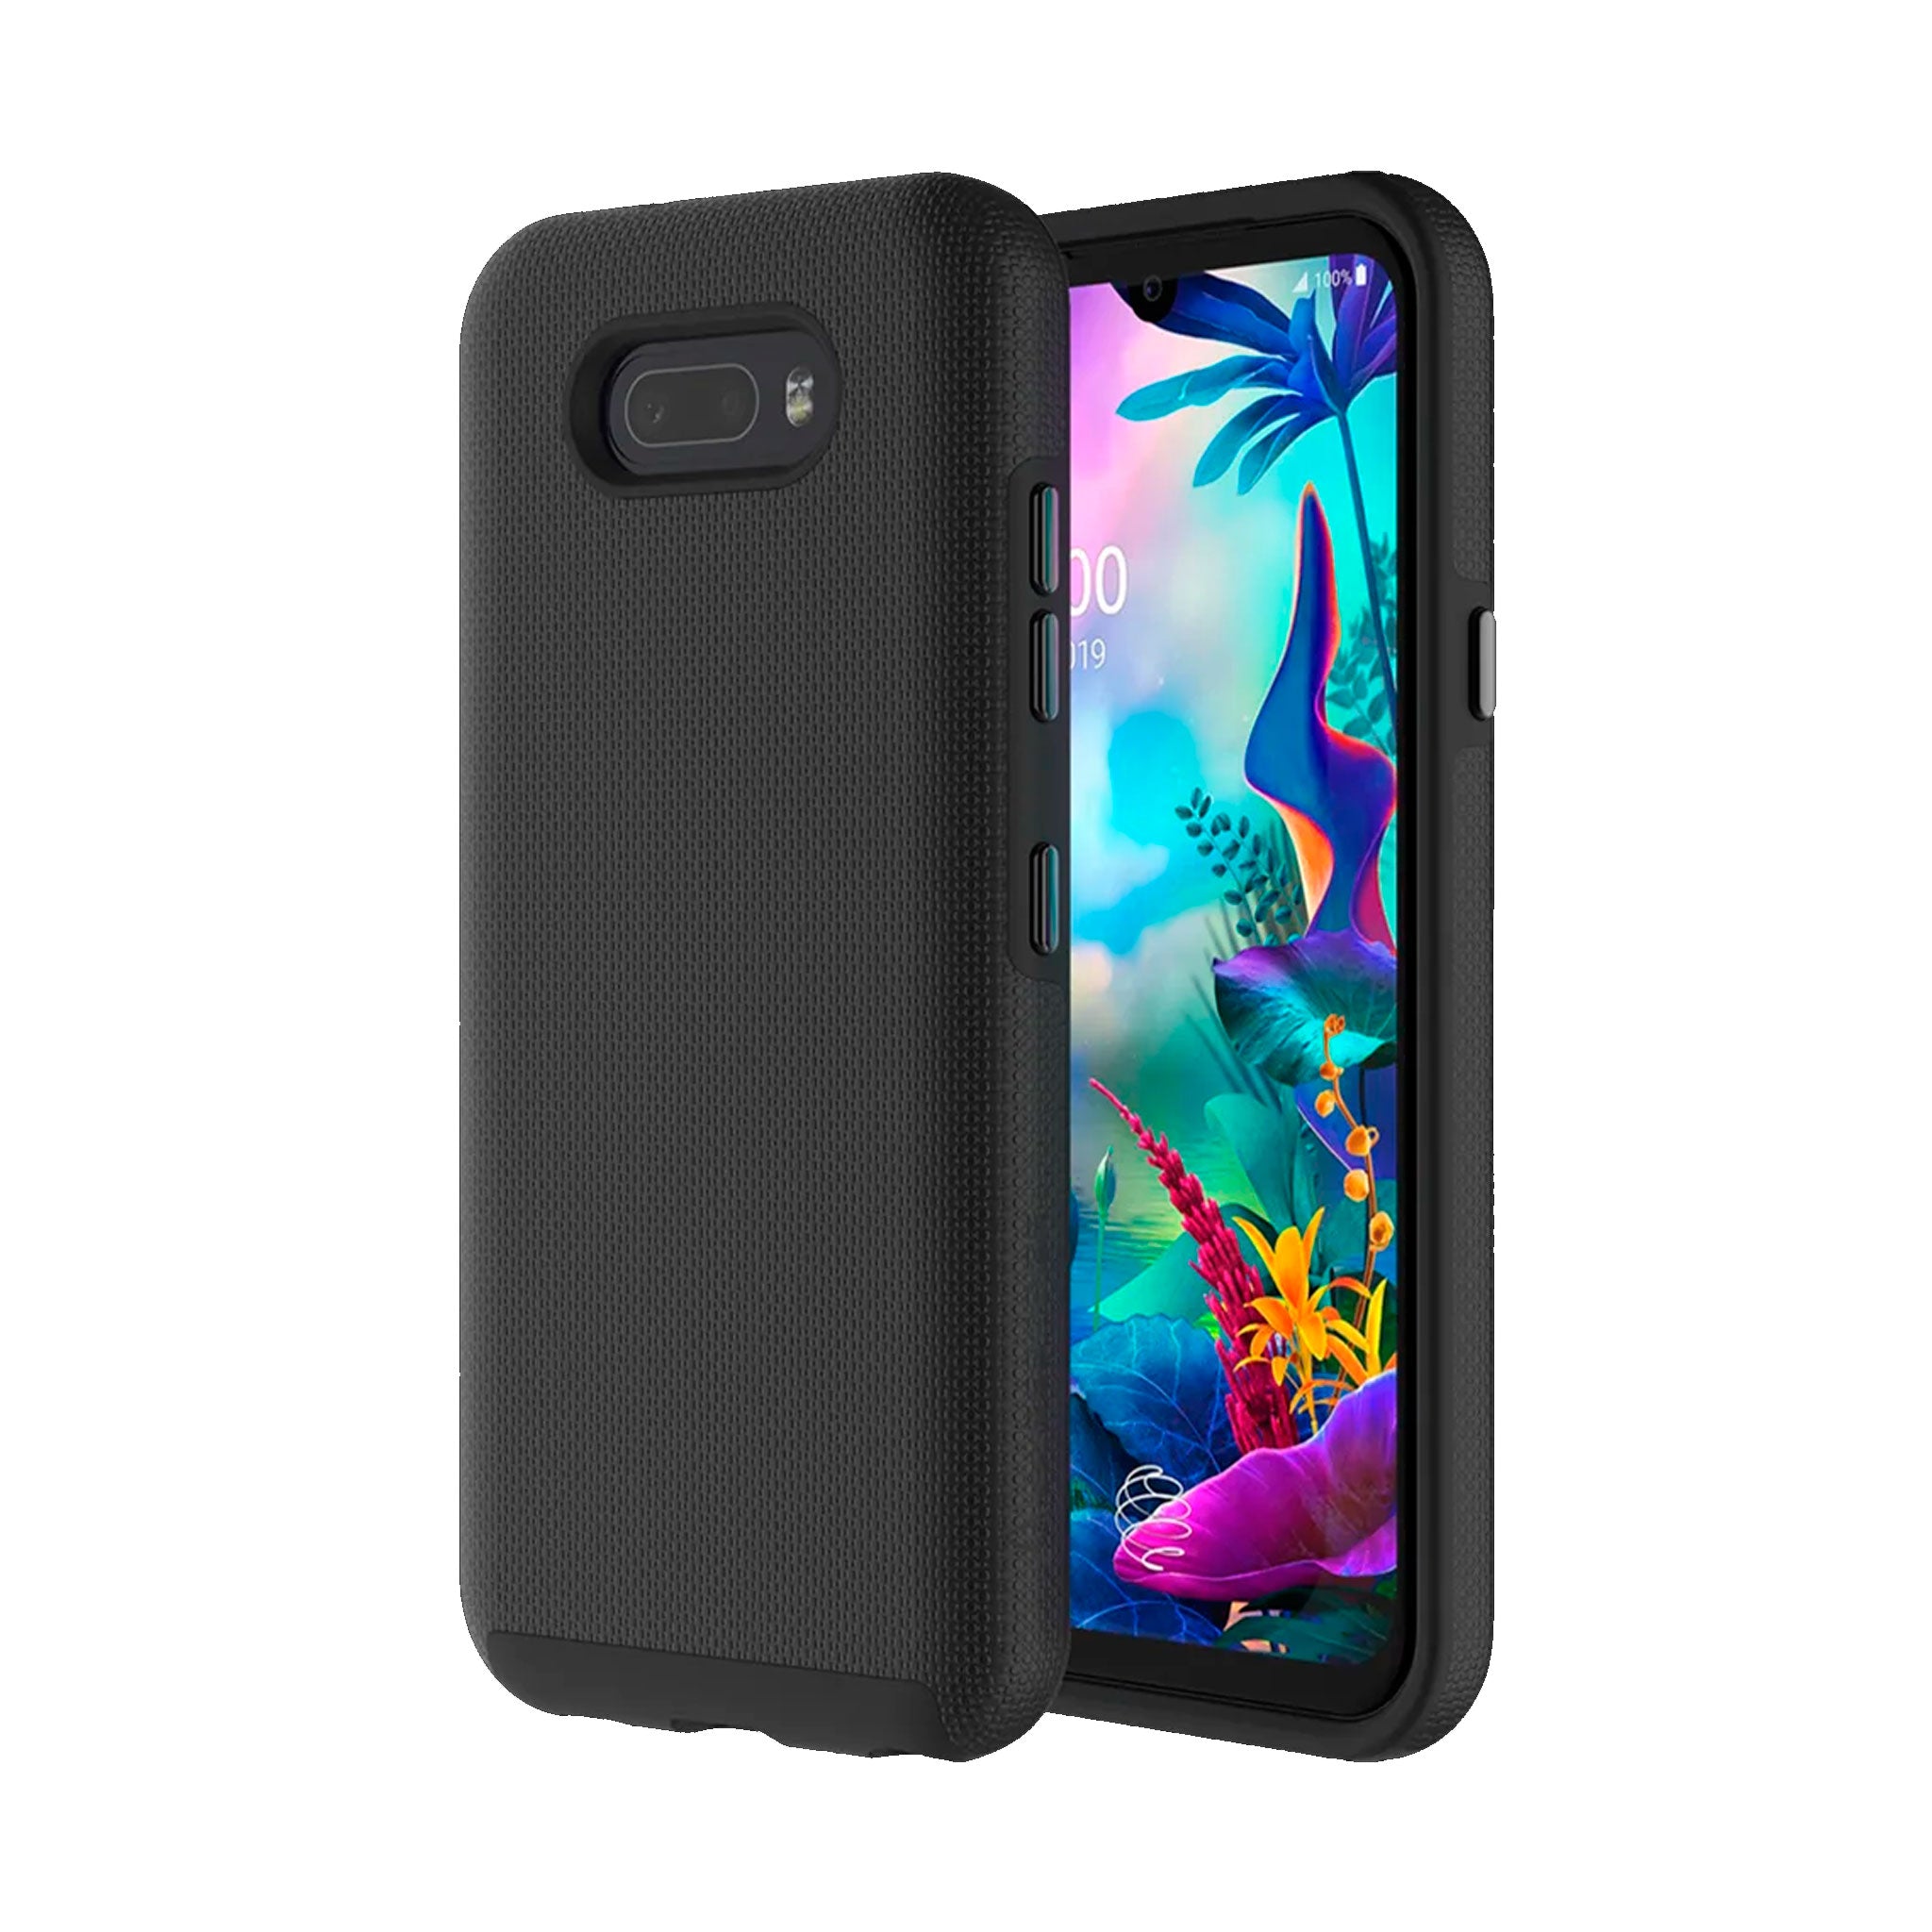 Axessorize - Protech Case For Lg K8x - Black